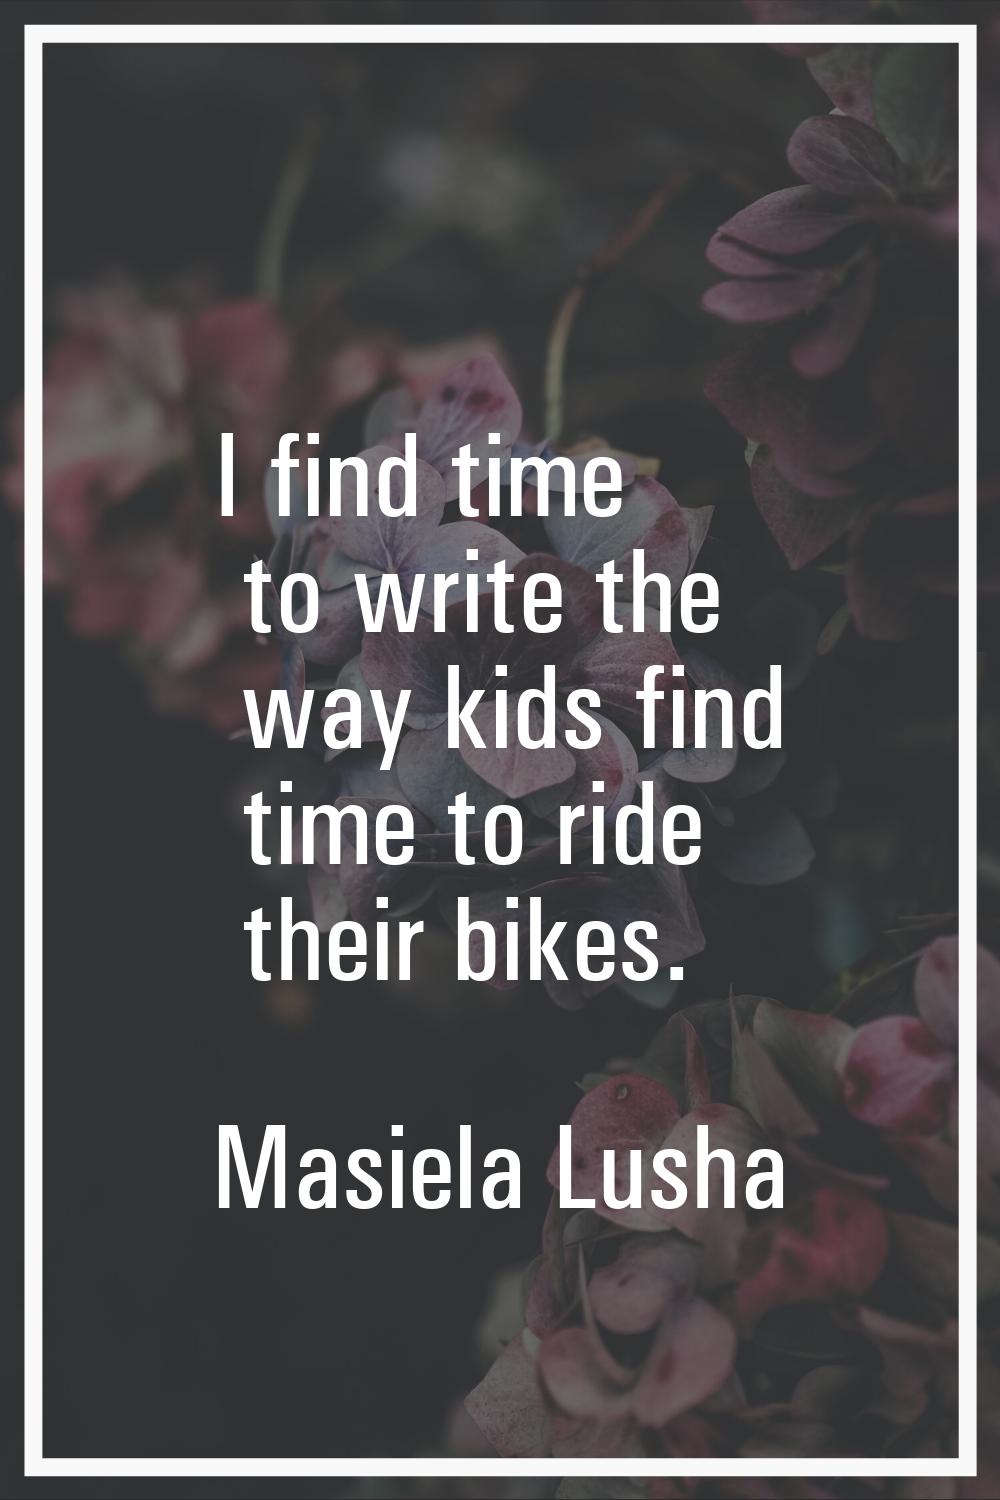 I find time to write the way kids find time to ride their bikes.